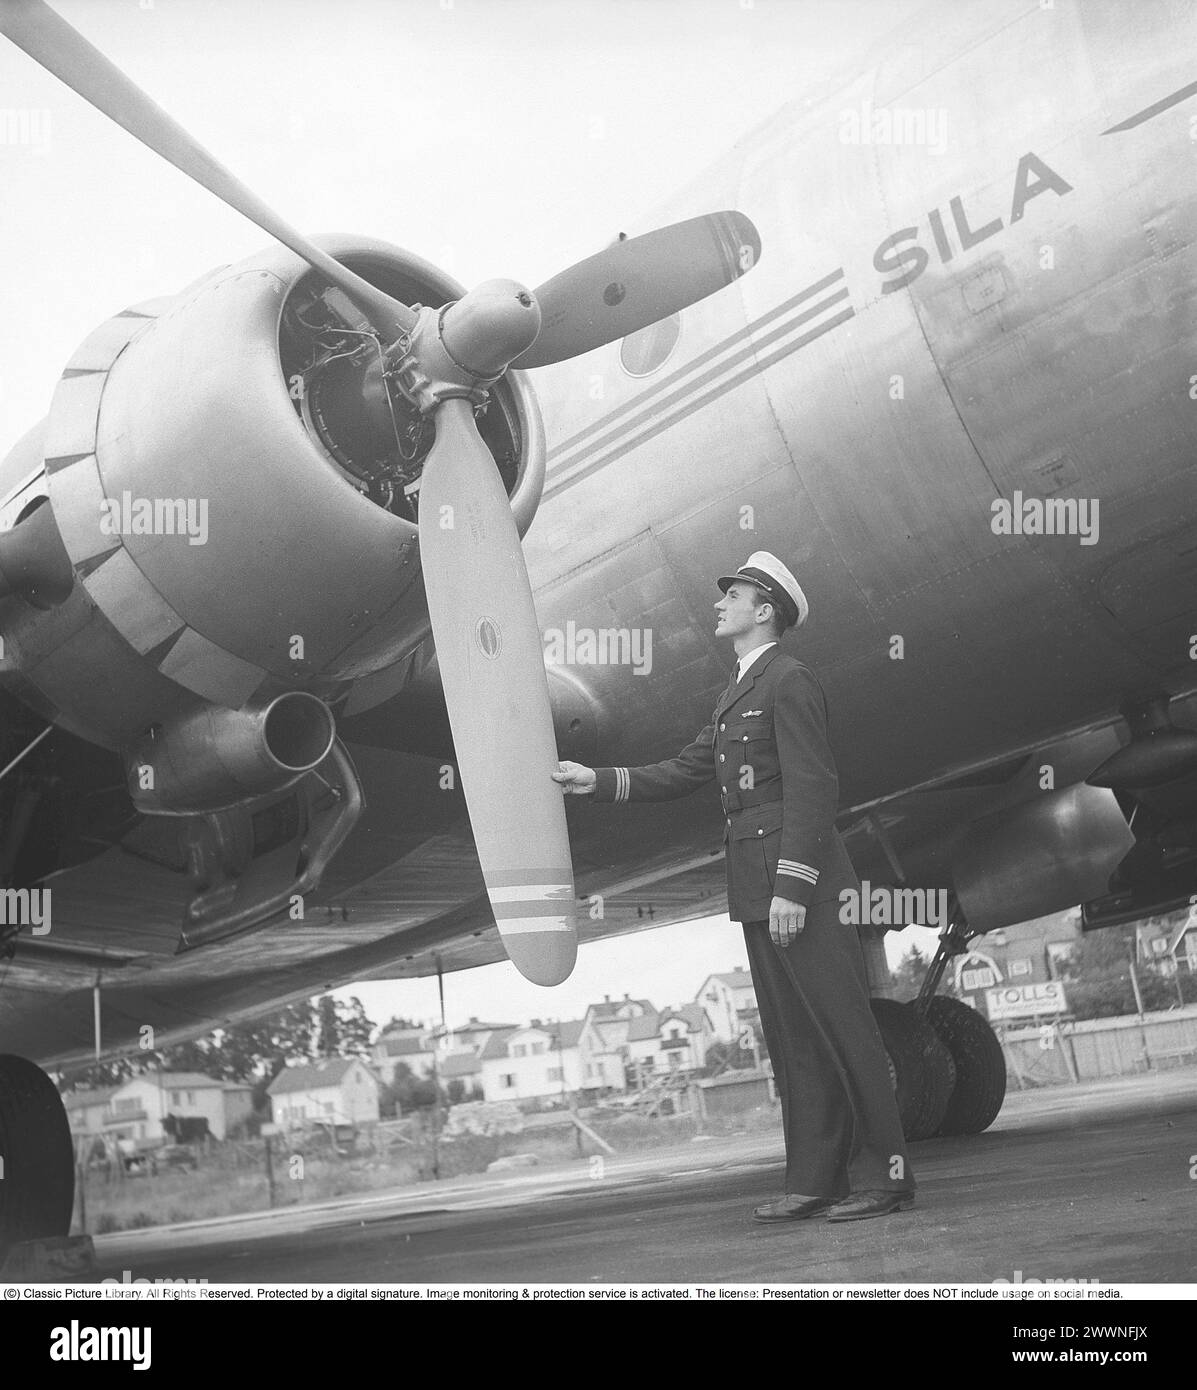 Pre-takeoff check in 1946. A pilot checks the plane's propellers before takeoff. The aircraft, a Boeing B-17, belongs to the Swedish airline SILA, (Svensk Interkontinental Lufttrafik AB). The company was owned by Wallenberg, and later merged with SAS. 1946 Kristoffersson Ref V134-5 Stock Photo